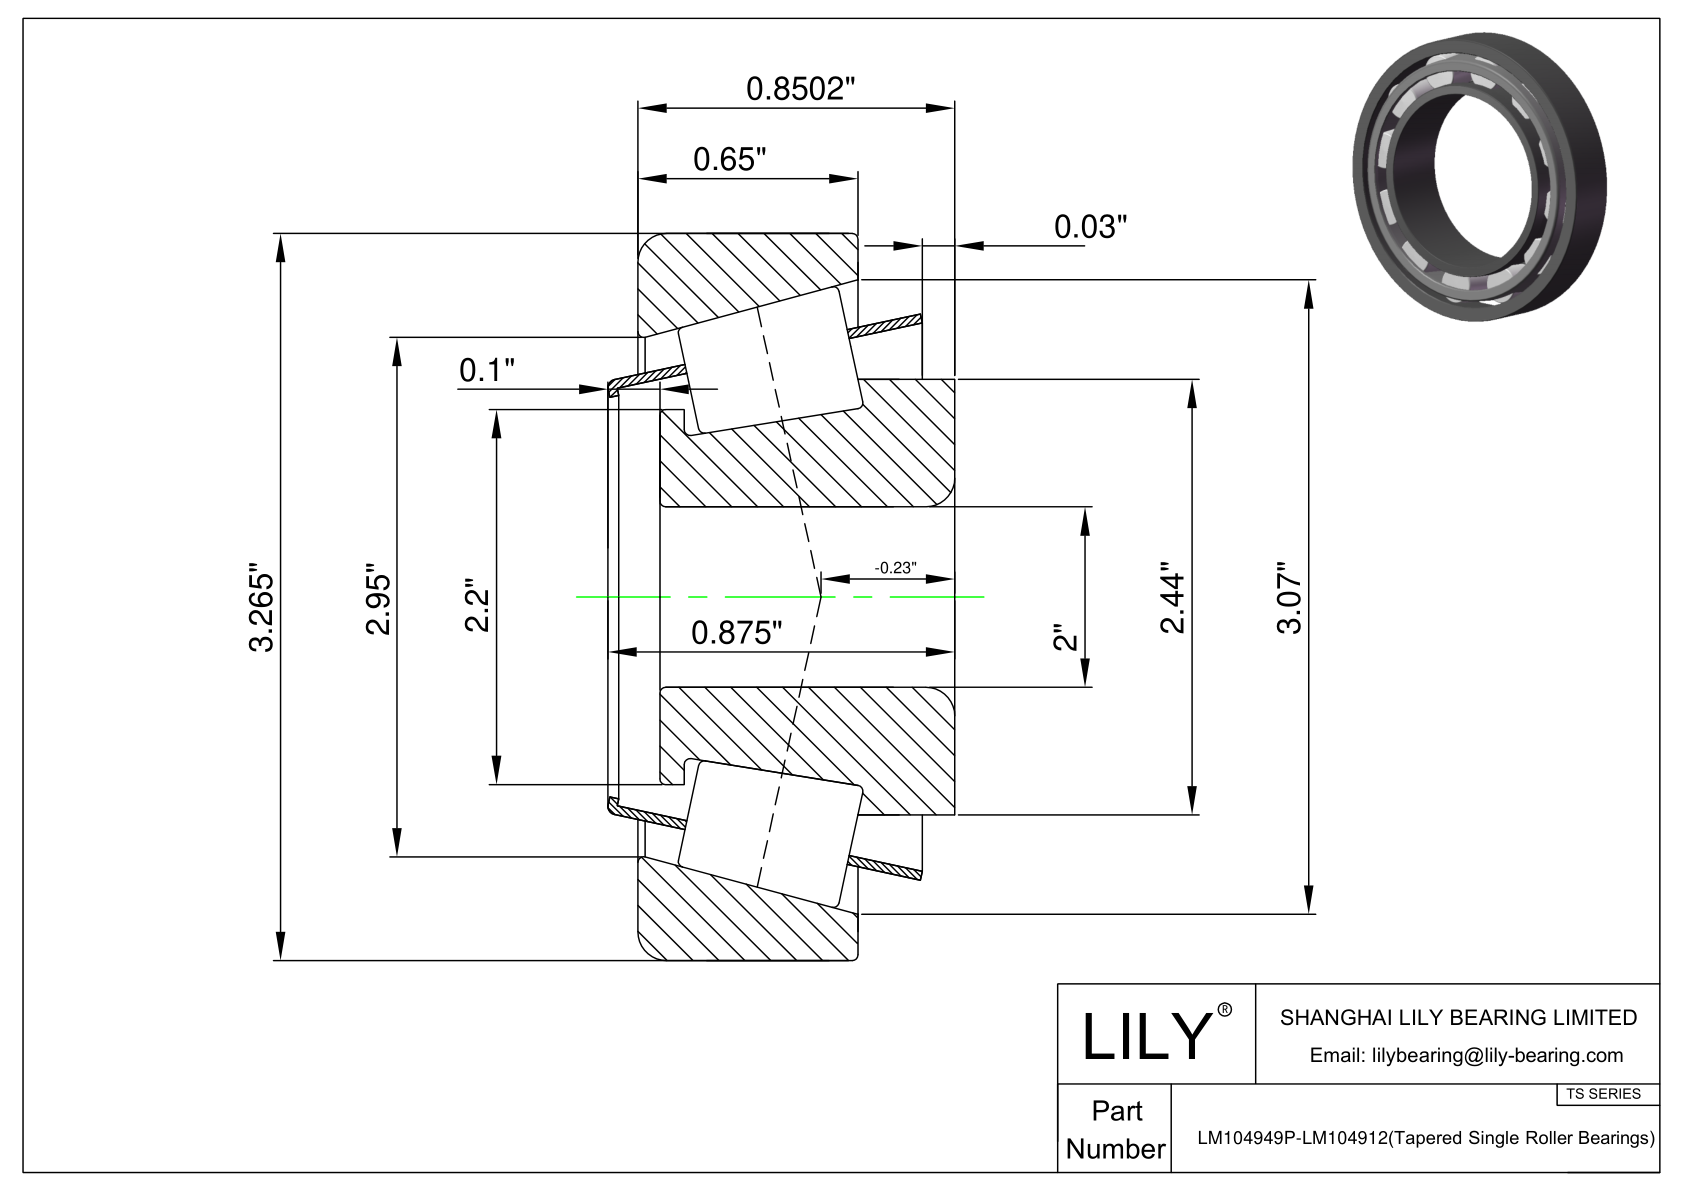 LM104949P-LM104912 TS (Tapered Single Roller Bearings) (Imperial) cad drawing